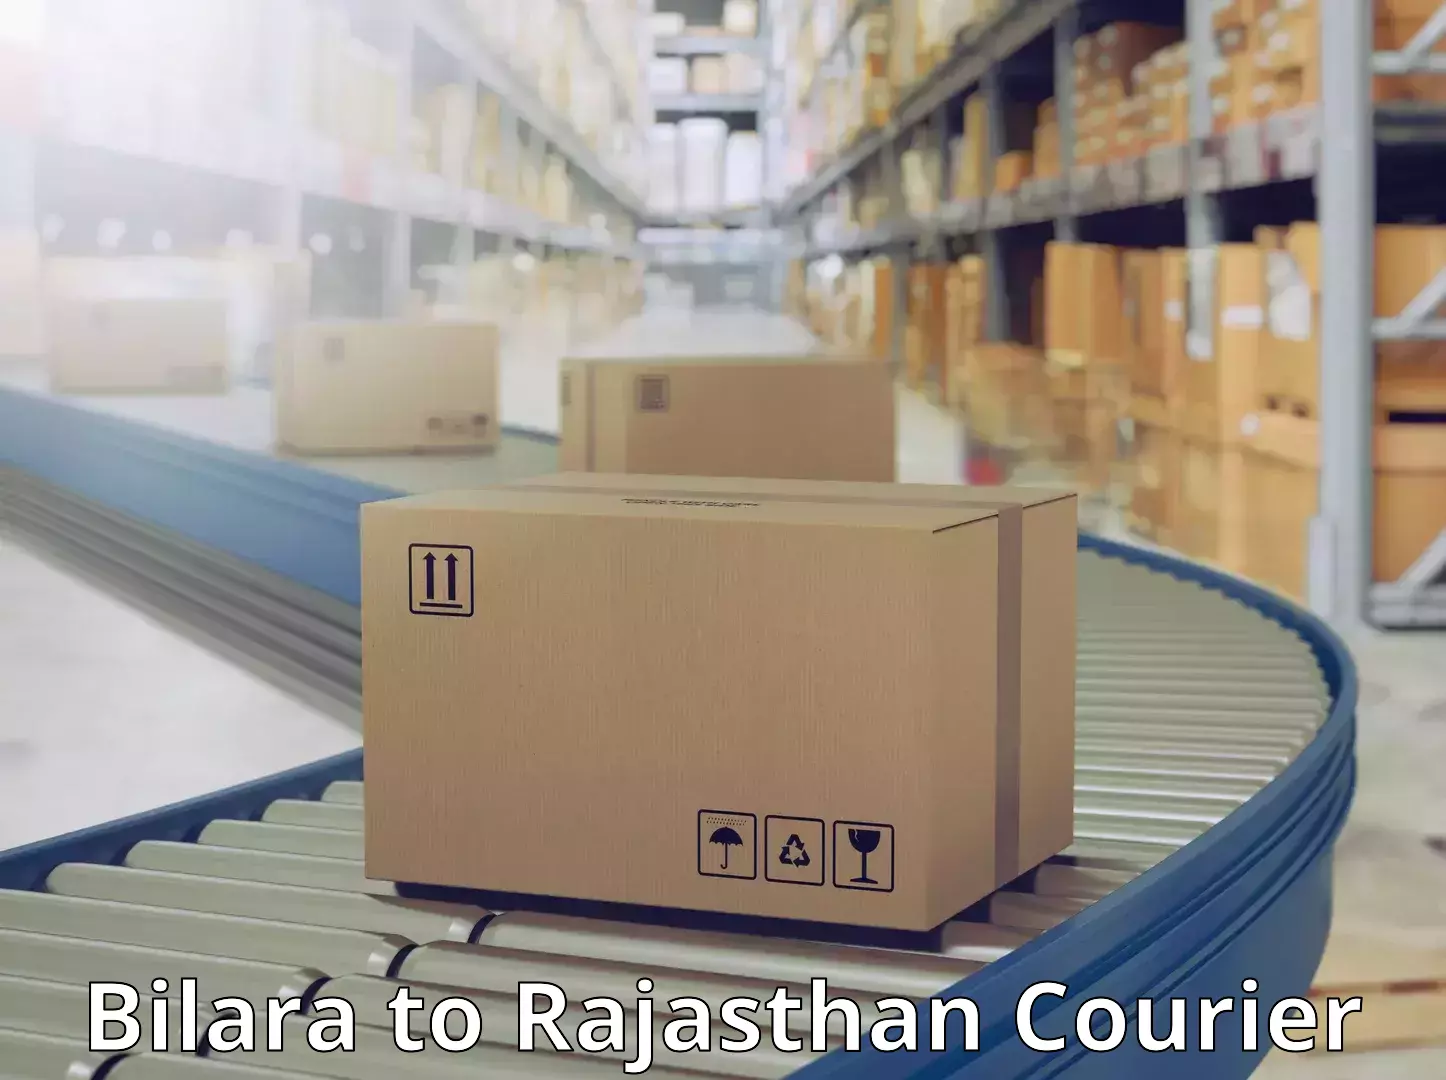 State-of-the-art courier technology Bilara to Rajasthan